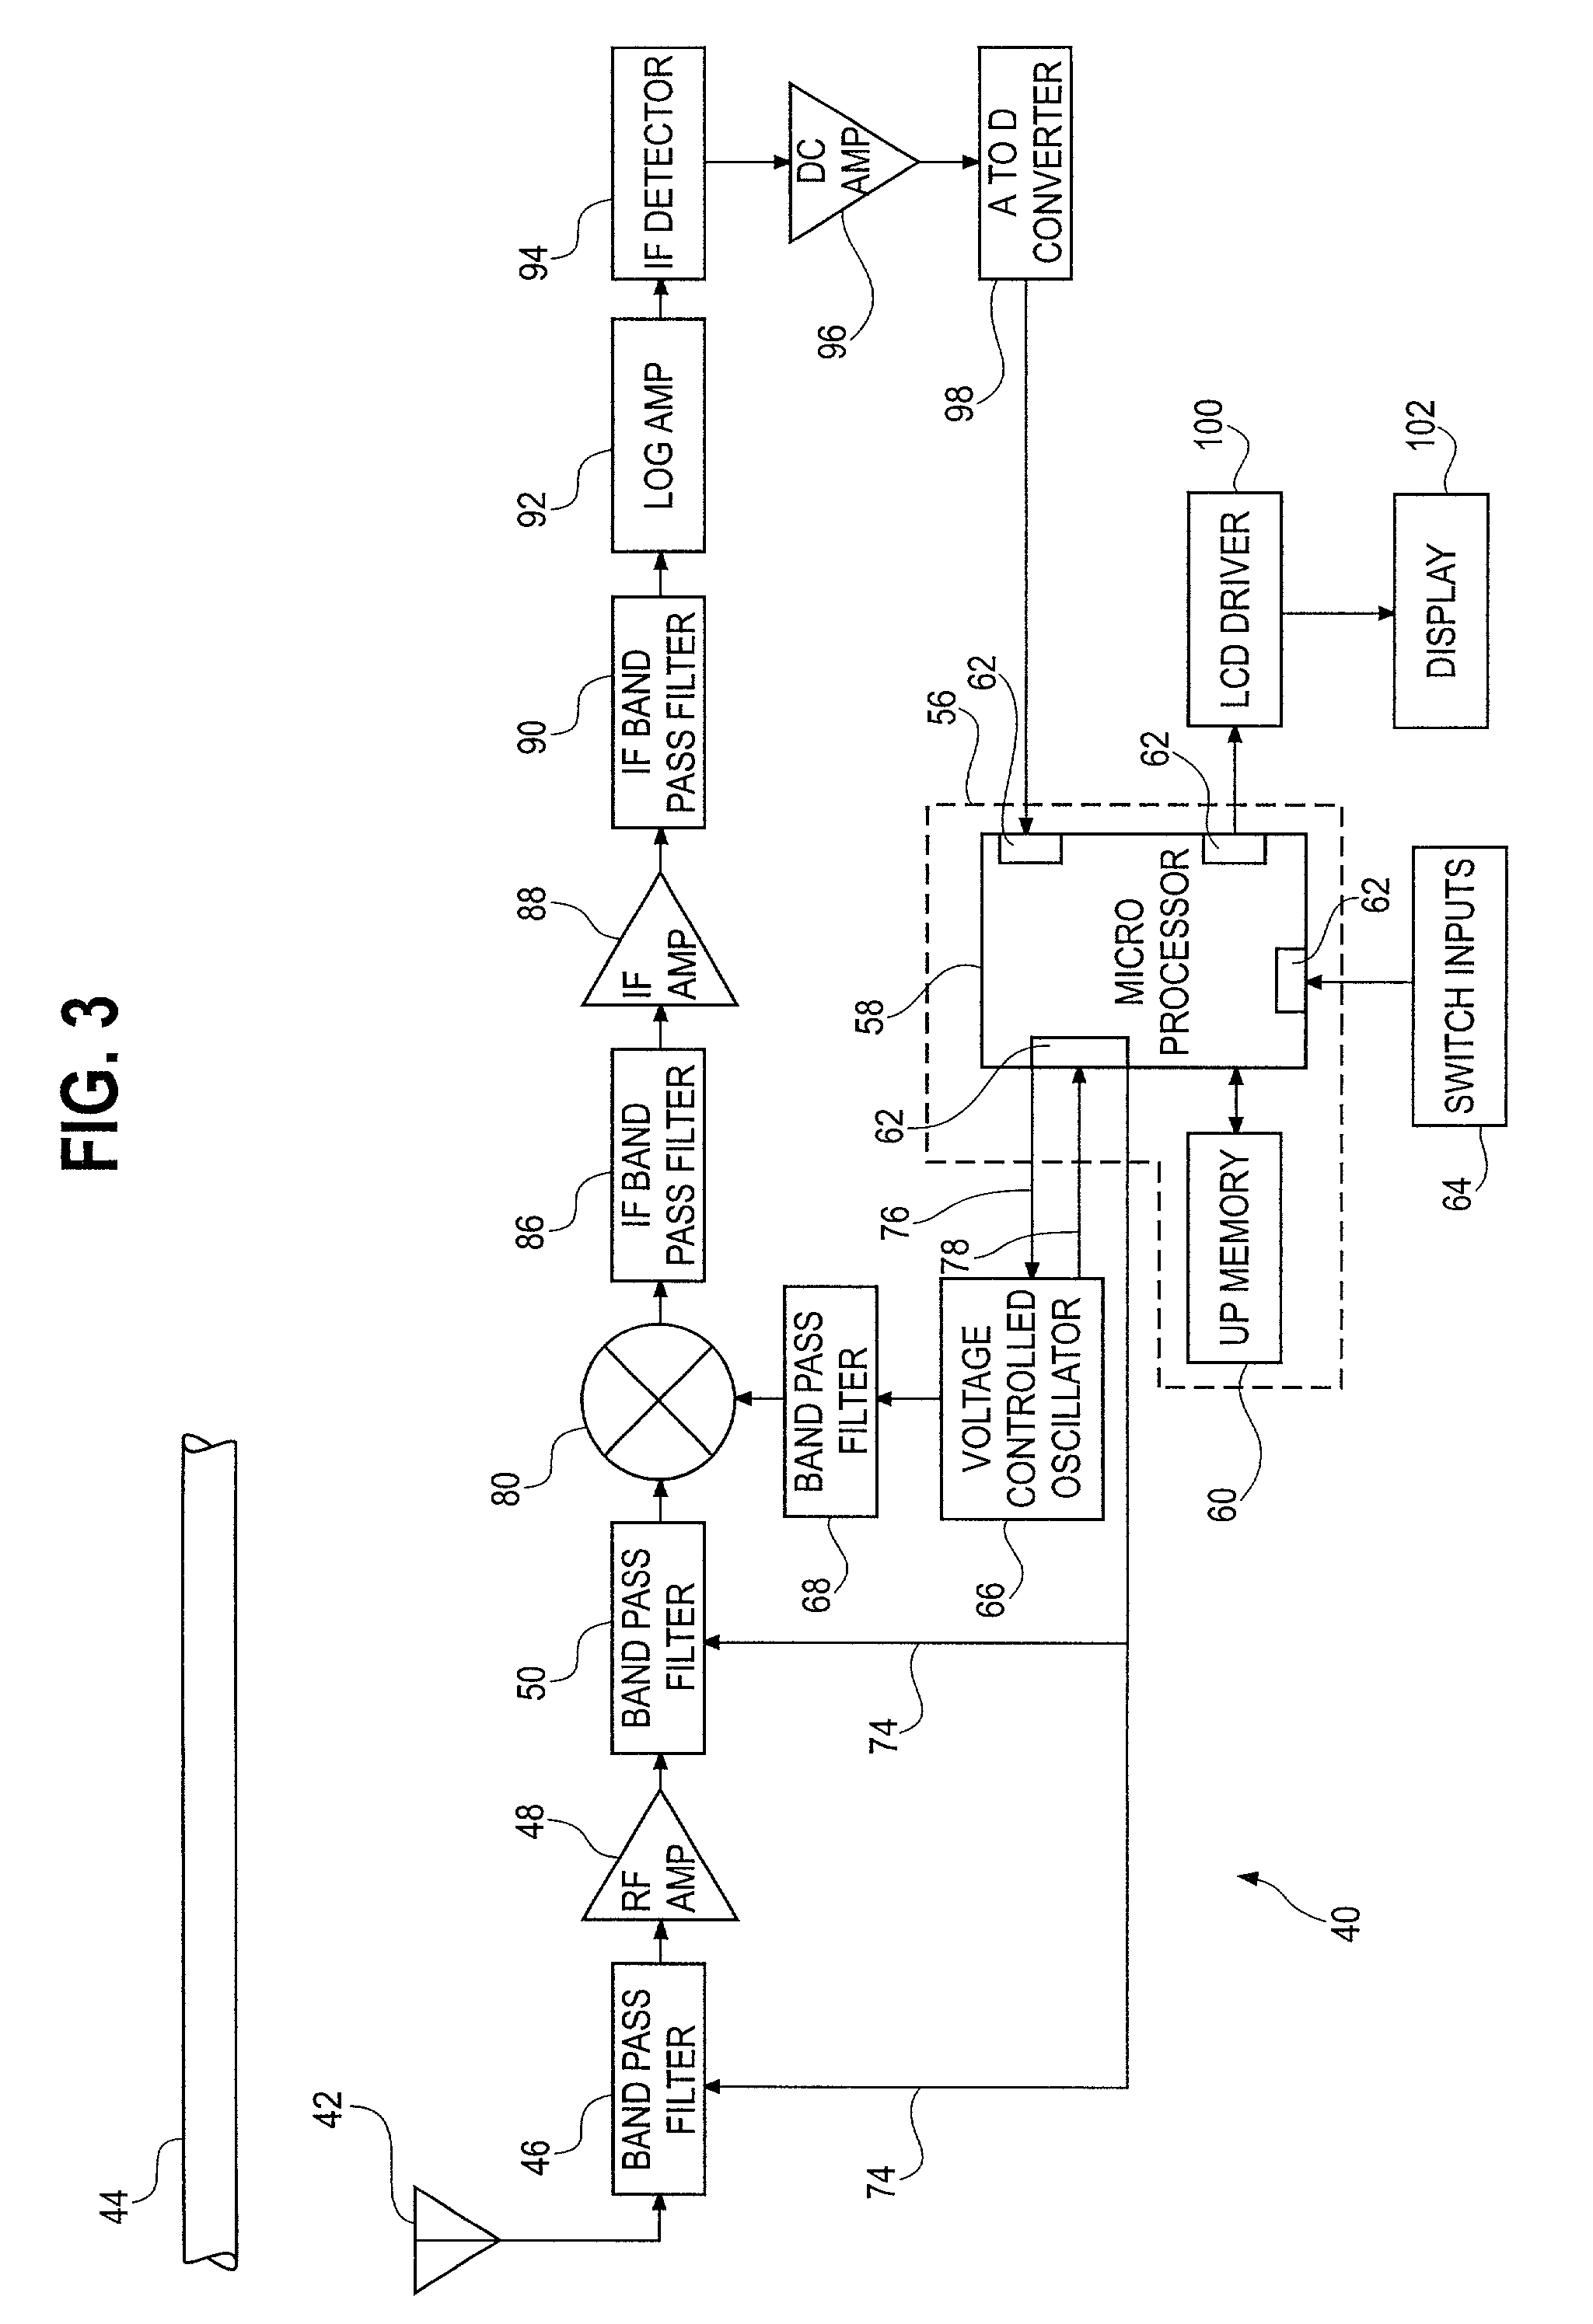 System and method for signal validation and leakage detection